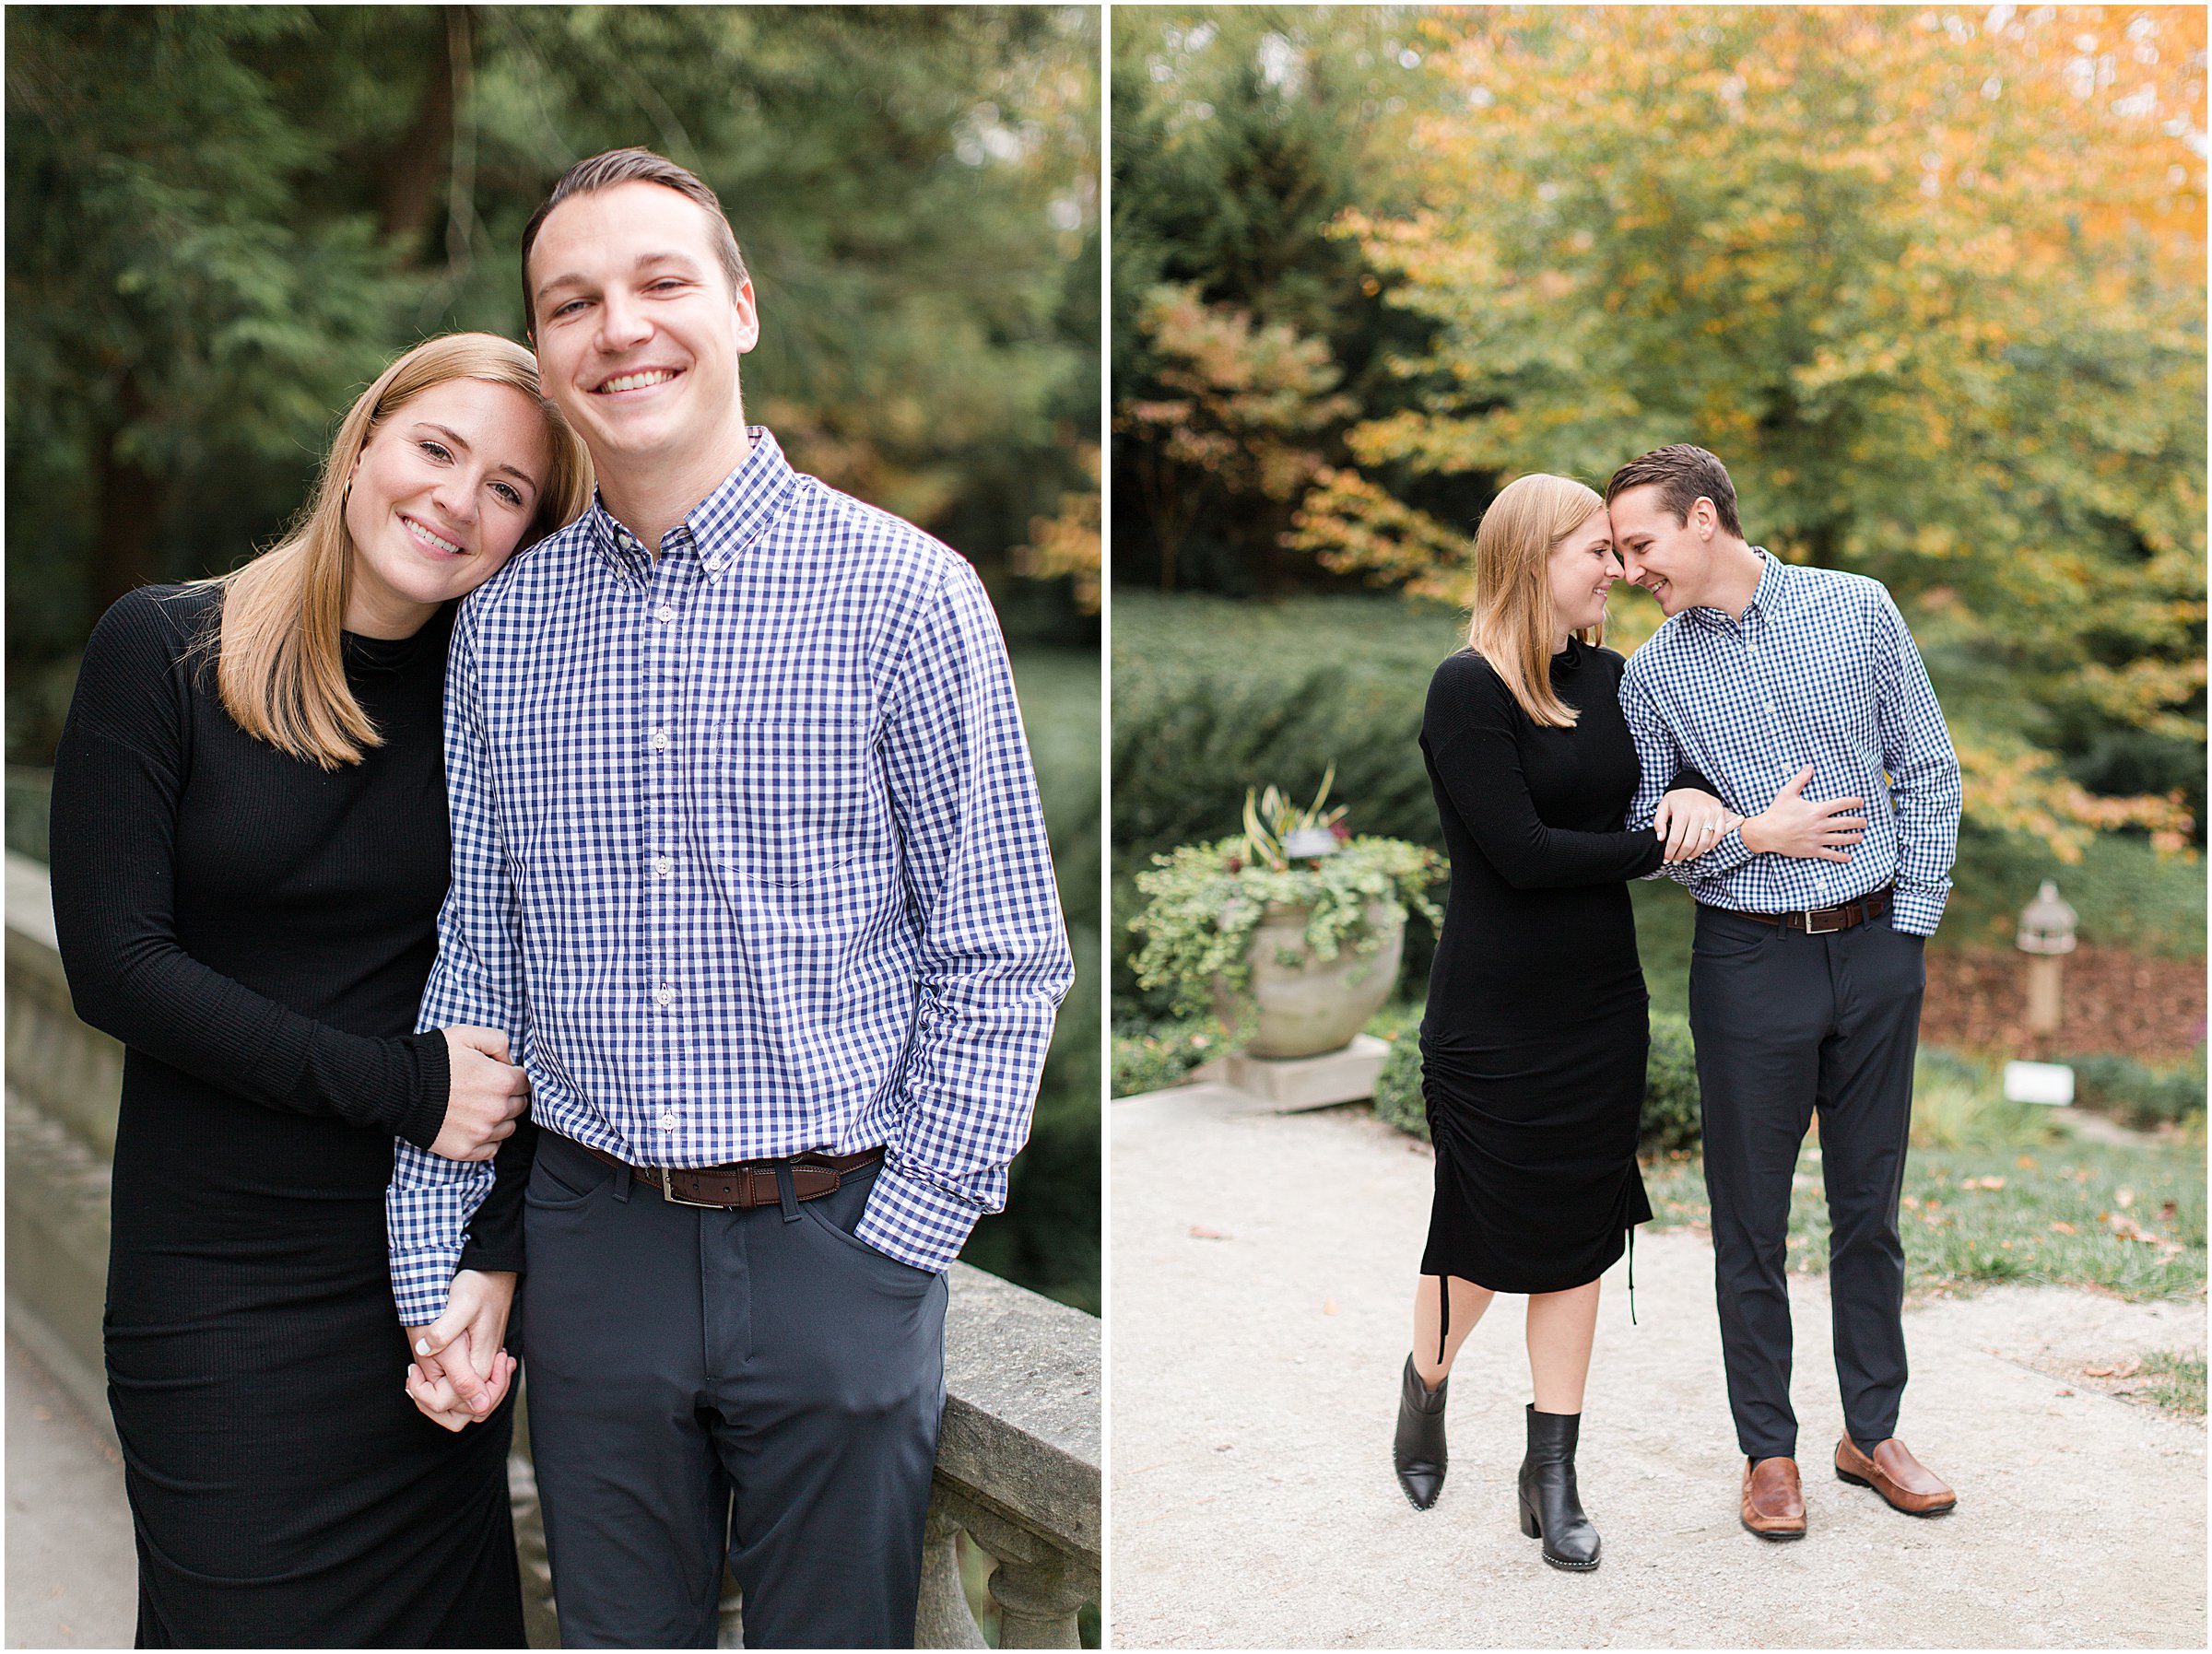 Autumn Newfields Engagement Session_0002.jpg